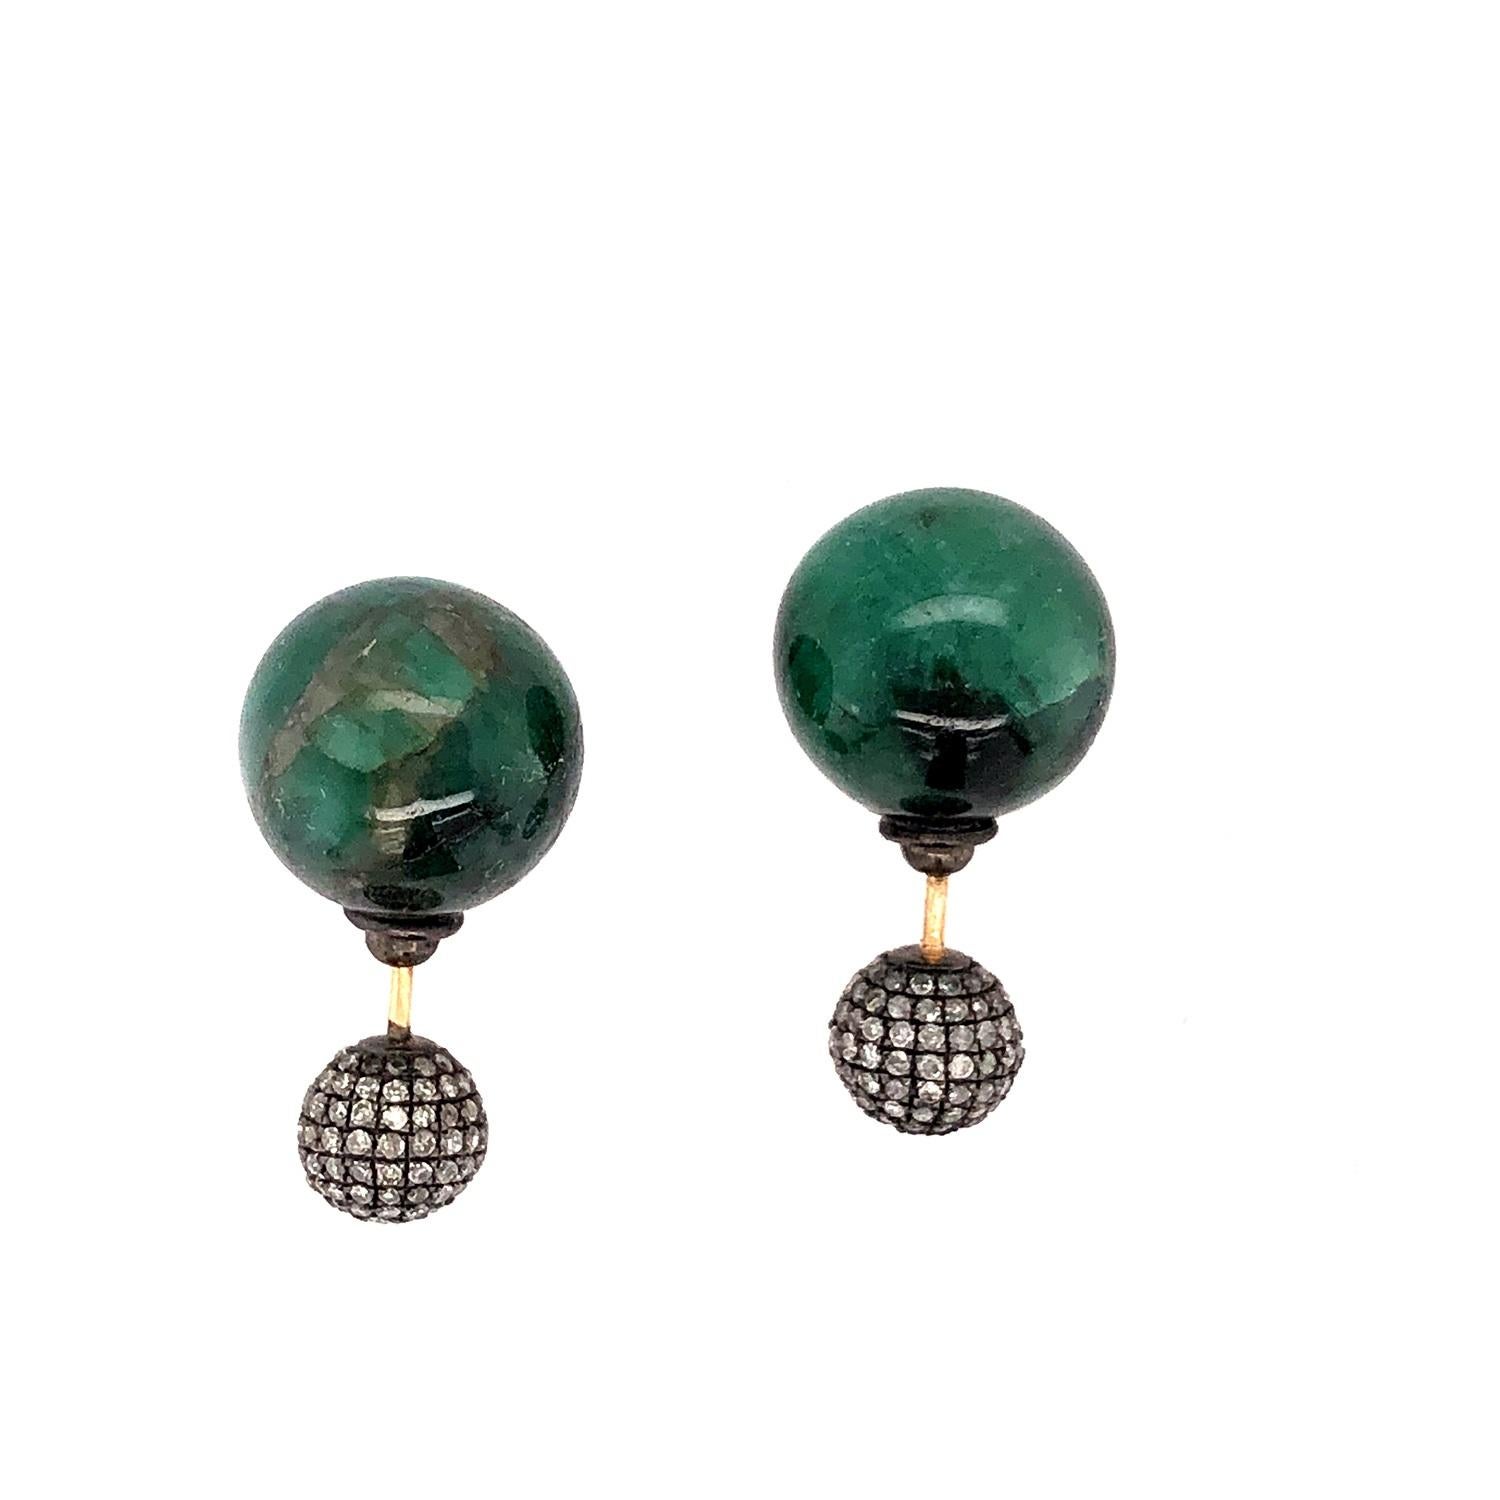 Mixed Cut Emerald & Pave Diamond Ball Earrings Made In 14k Gold For Sale